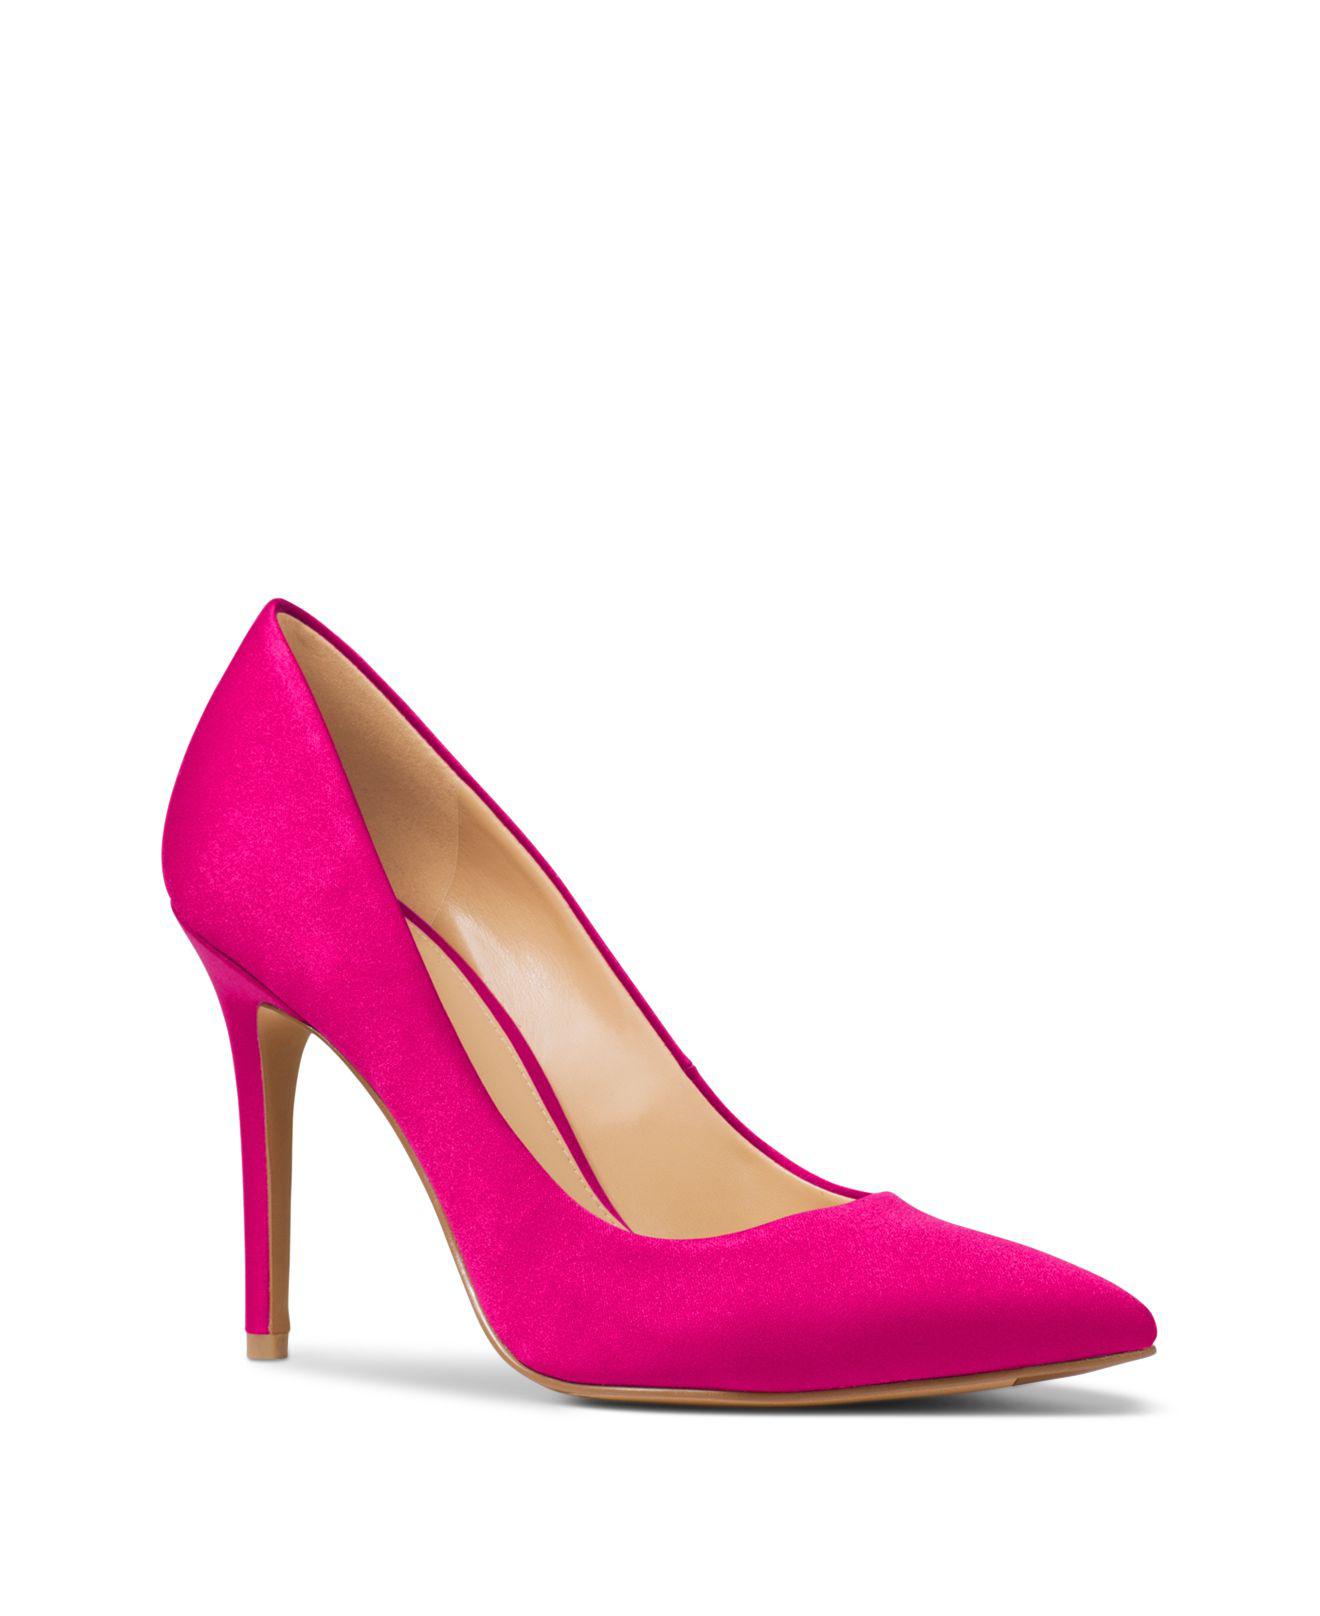 Michael Kors Claire Satin Pump in Ultra 